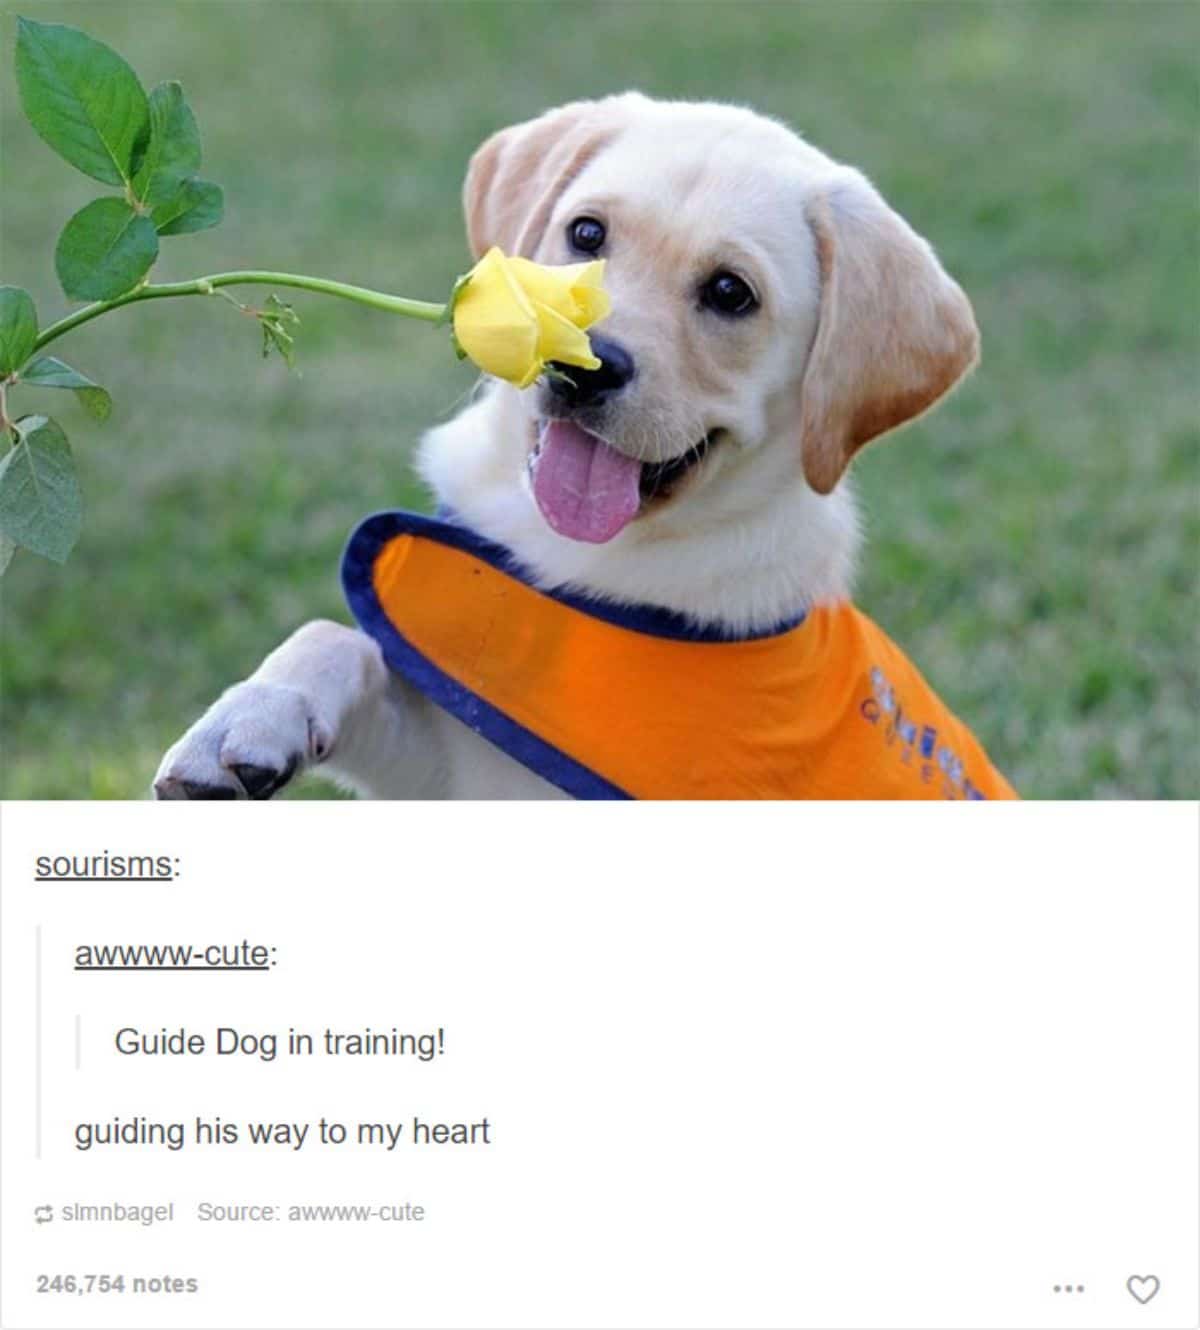 golden retriever puppy in orange and blue harness sniffing a yellow rose